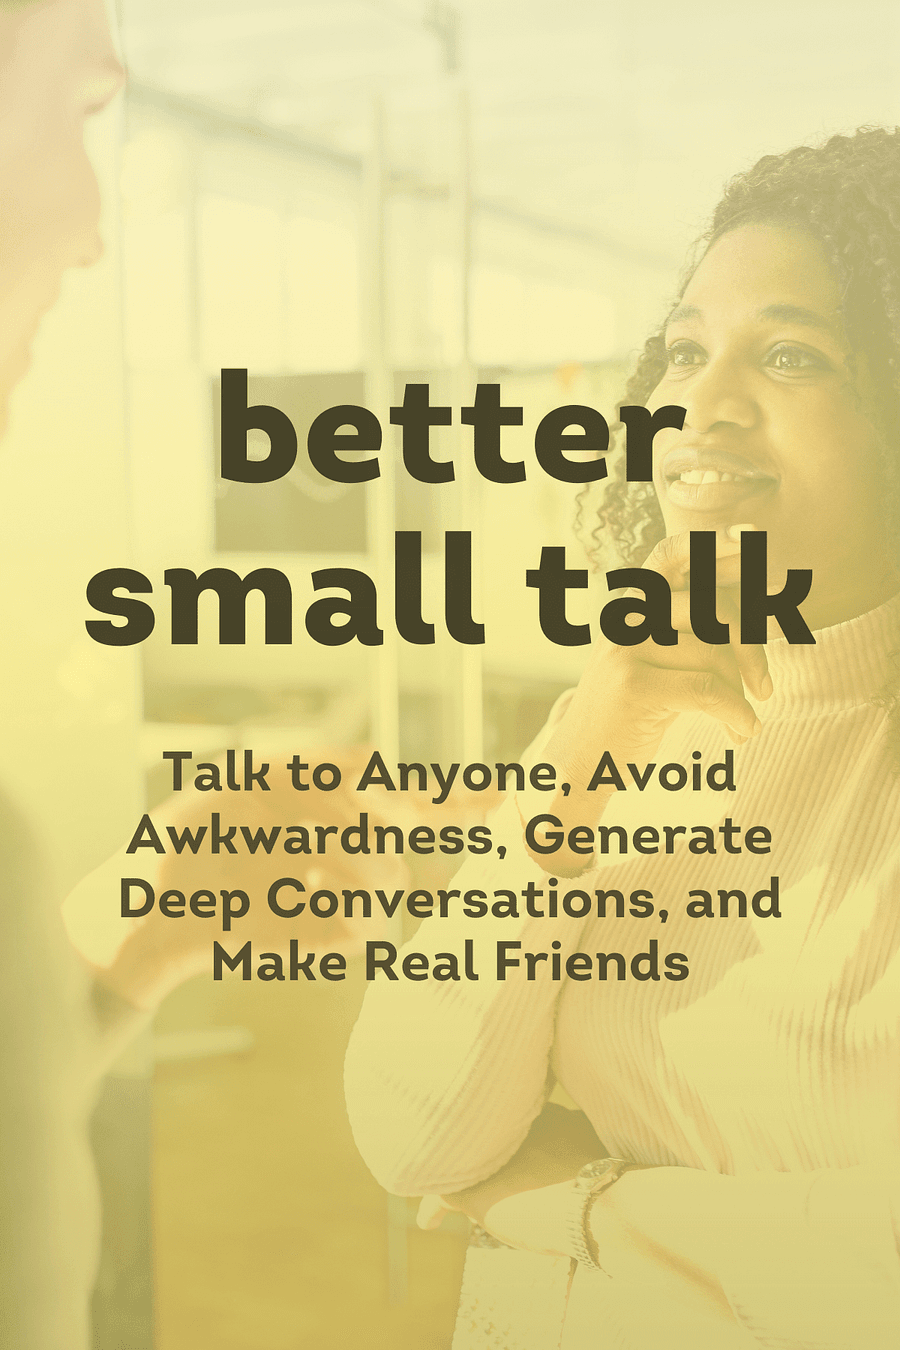 Better Small Talk by Patrick King - Book Summary